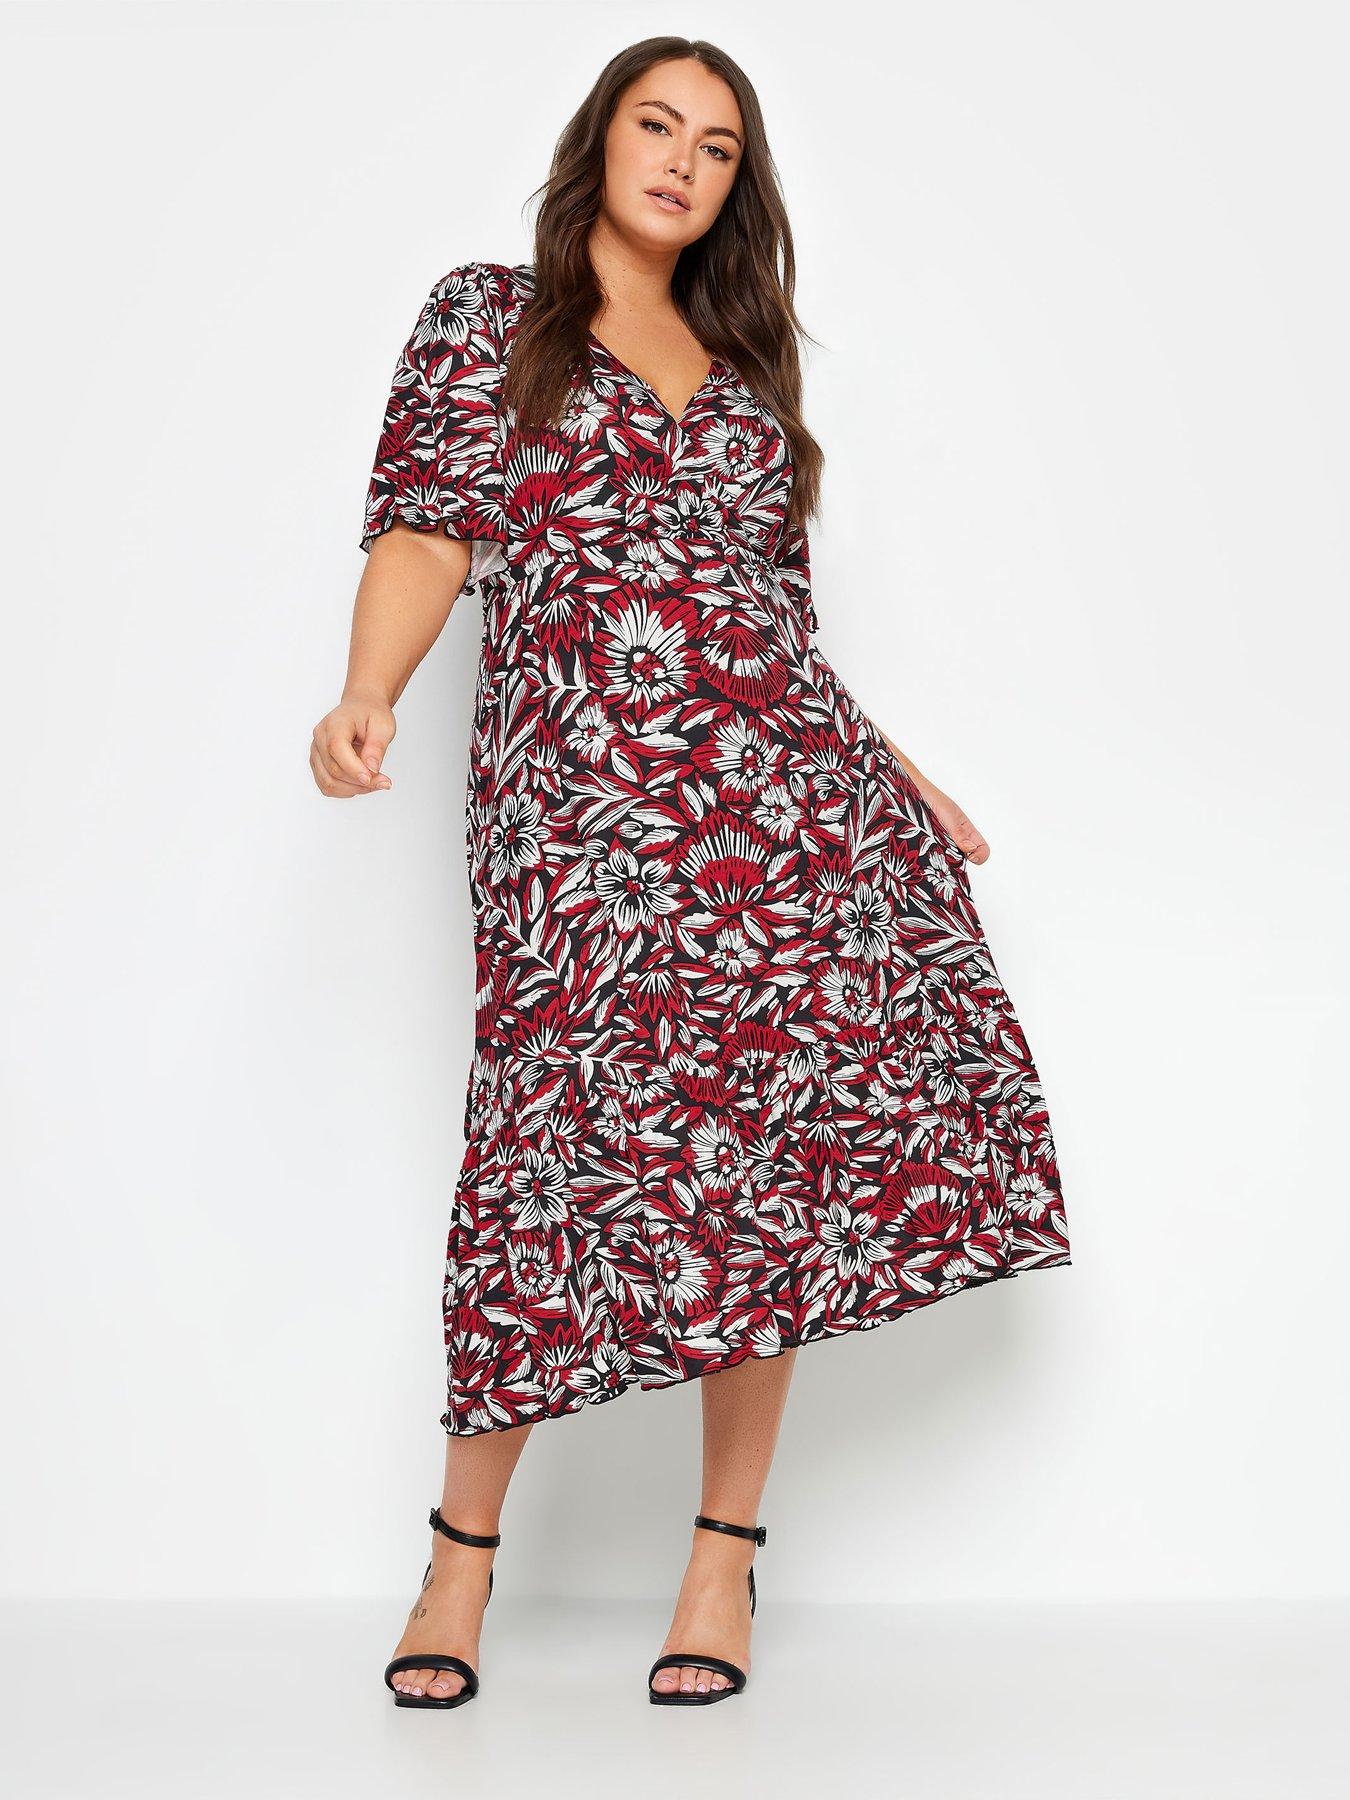 YOURS Plus Size Red Floral Print Textured Midaxi Dress